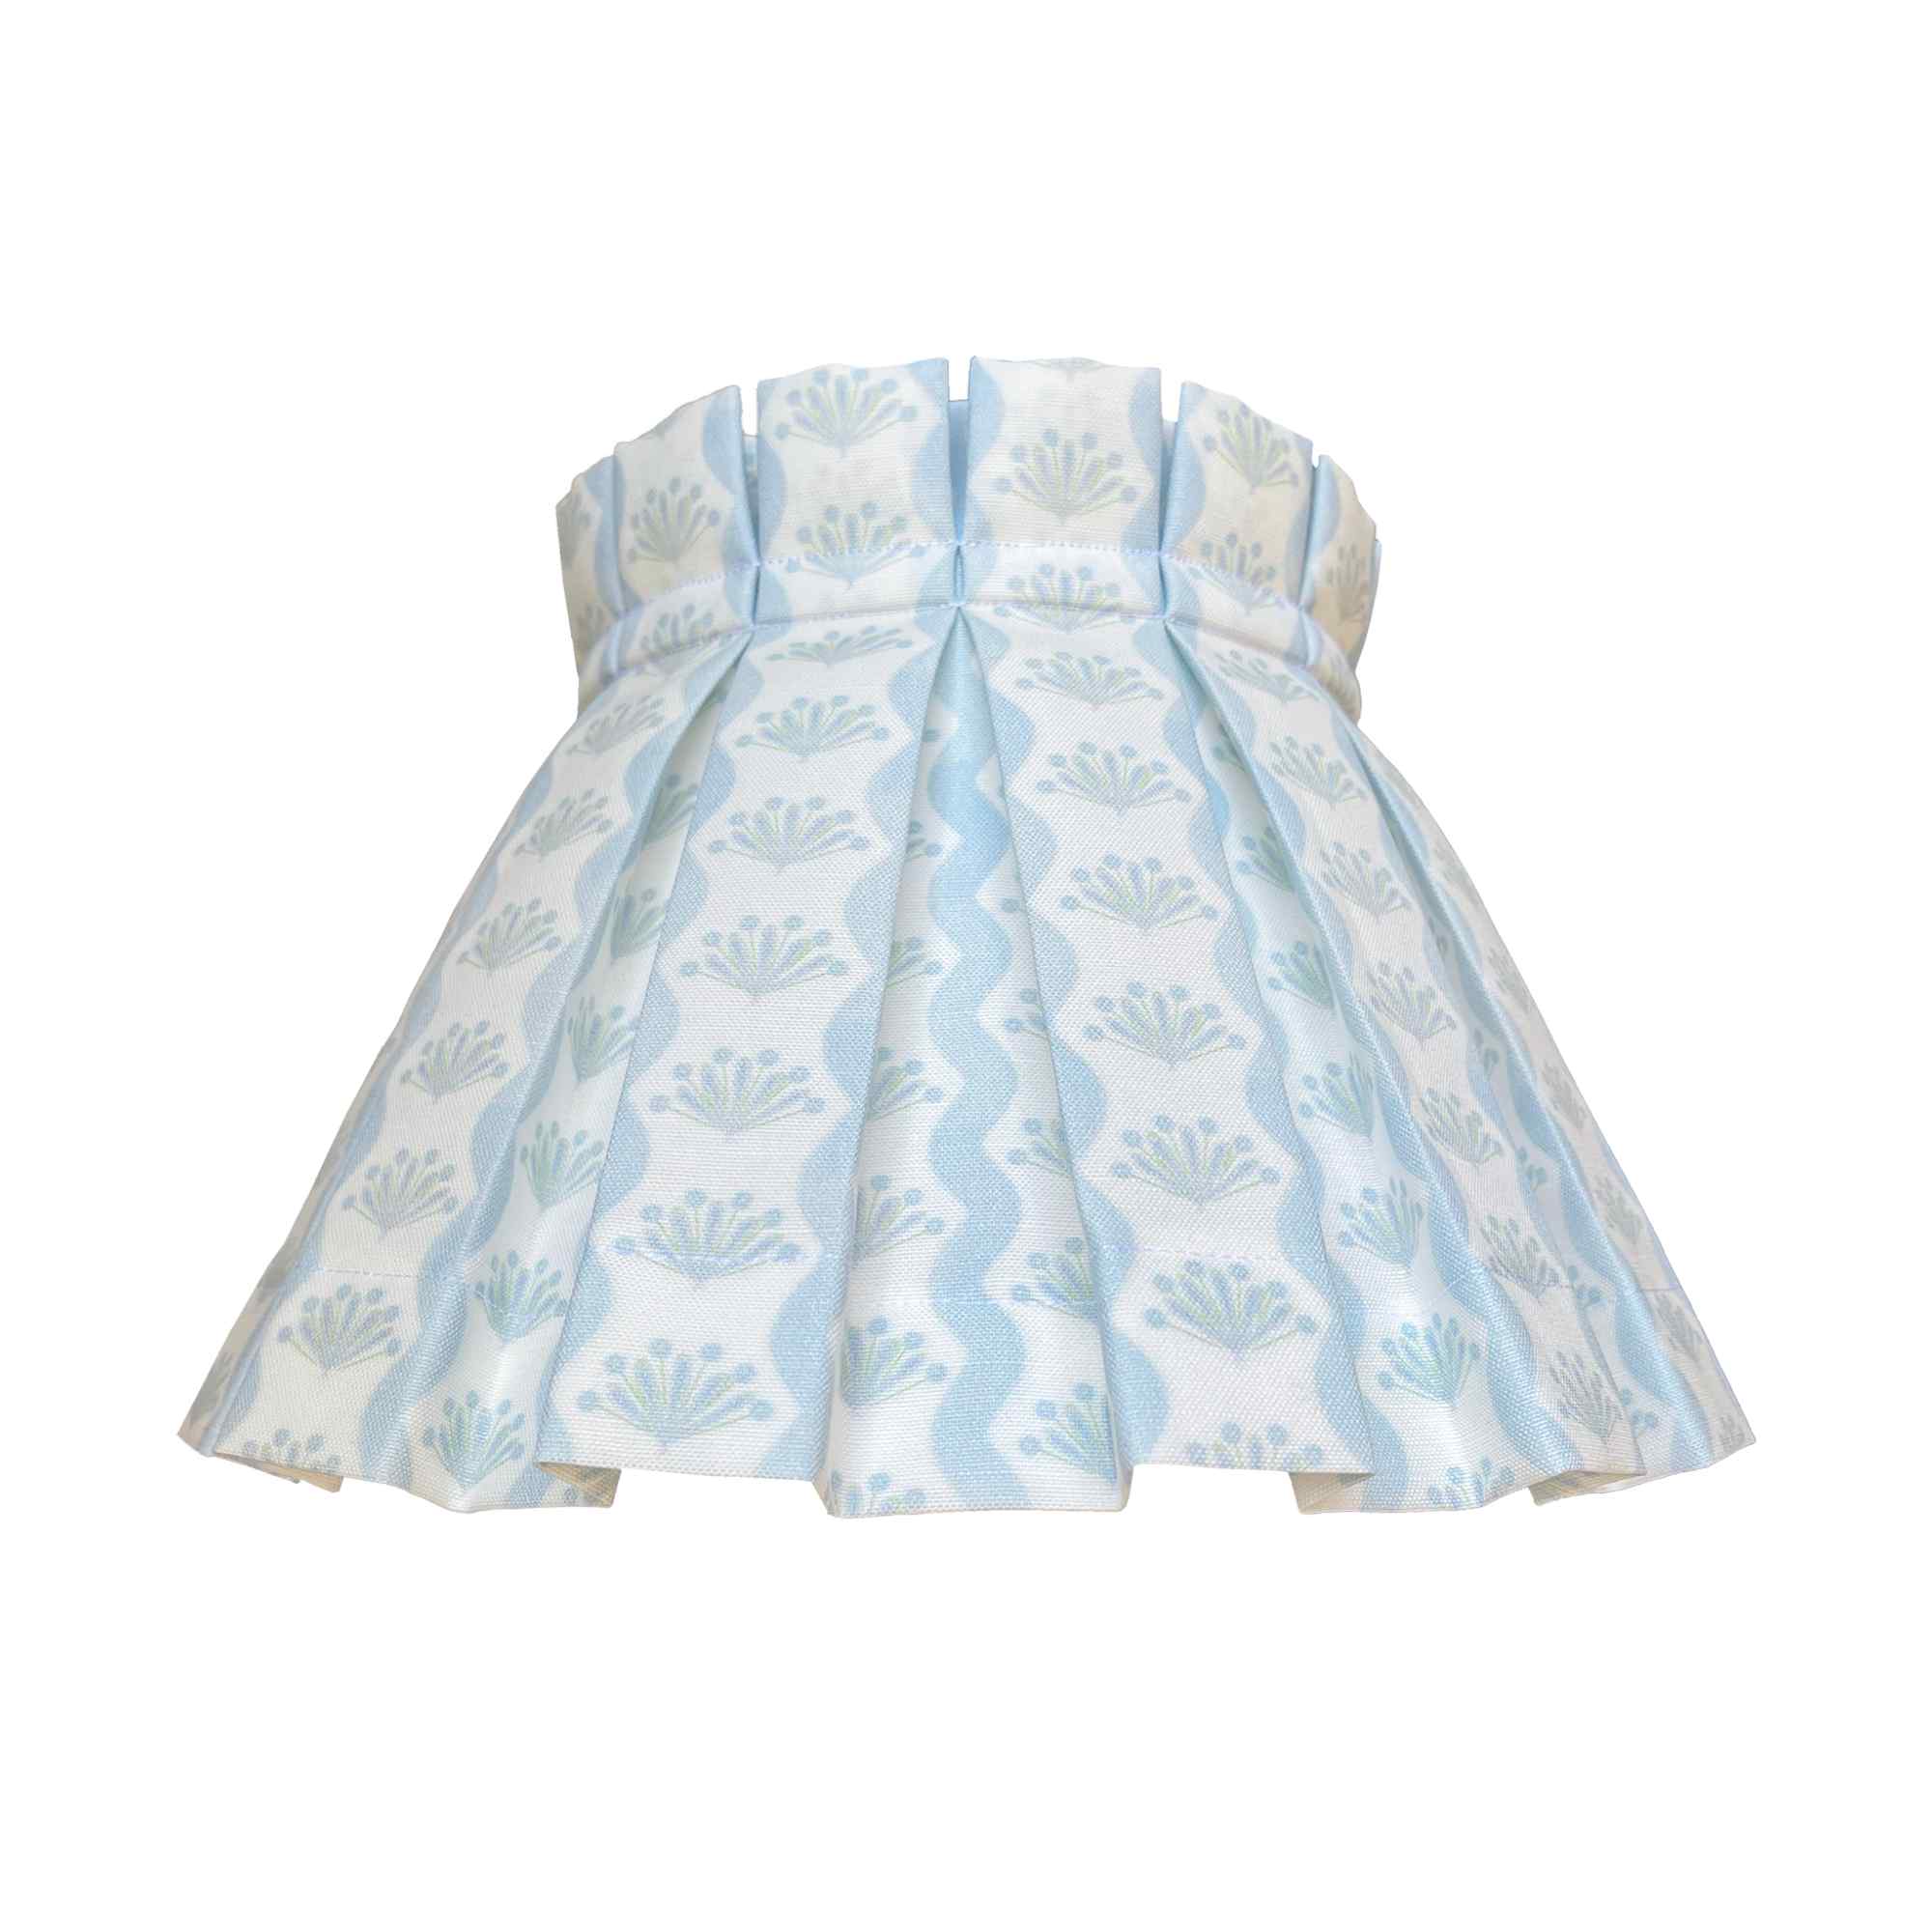 baby blue box pleat lampshade in floral motif and waved stripes is perfect for coastal vibe or a kids room